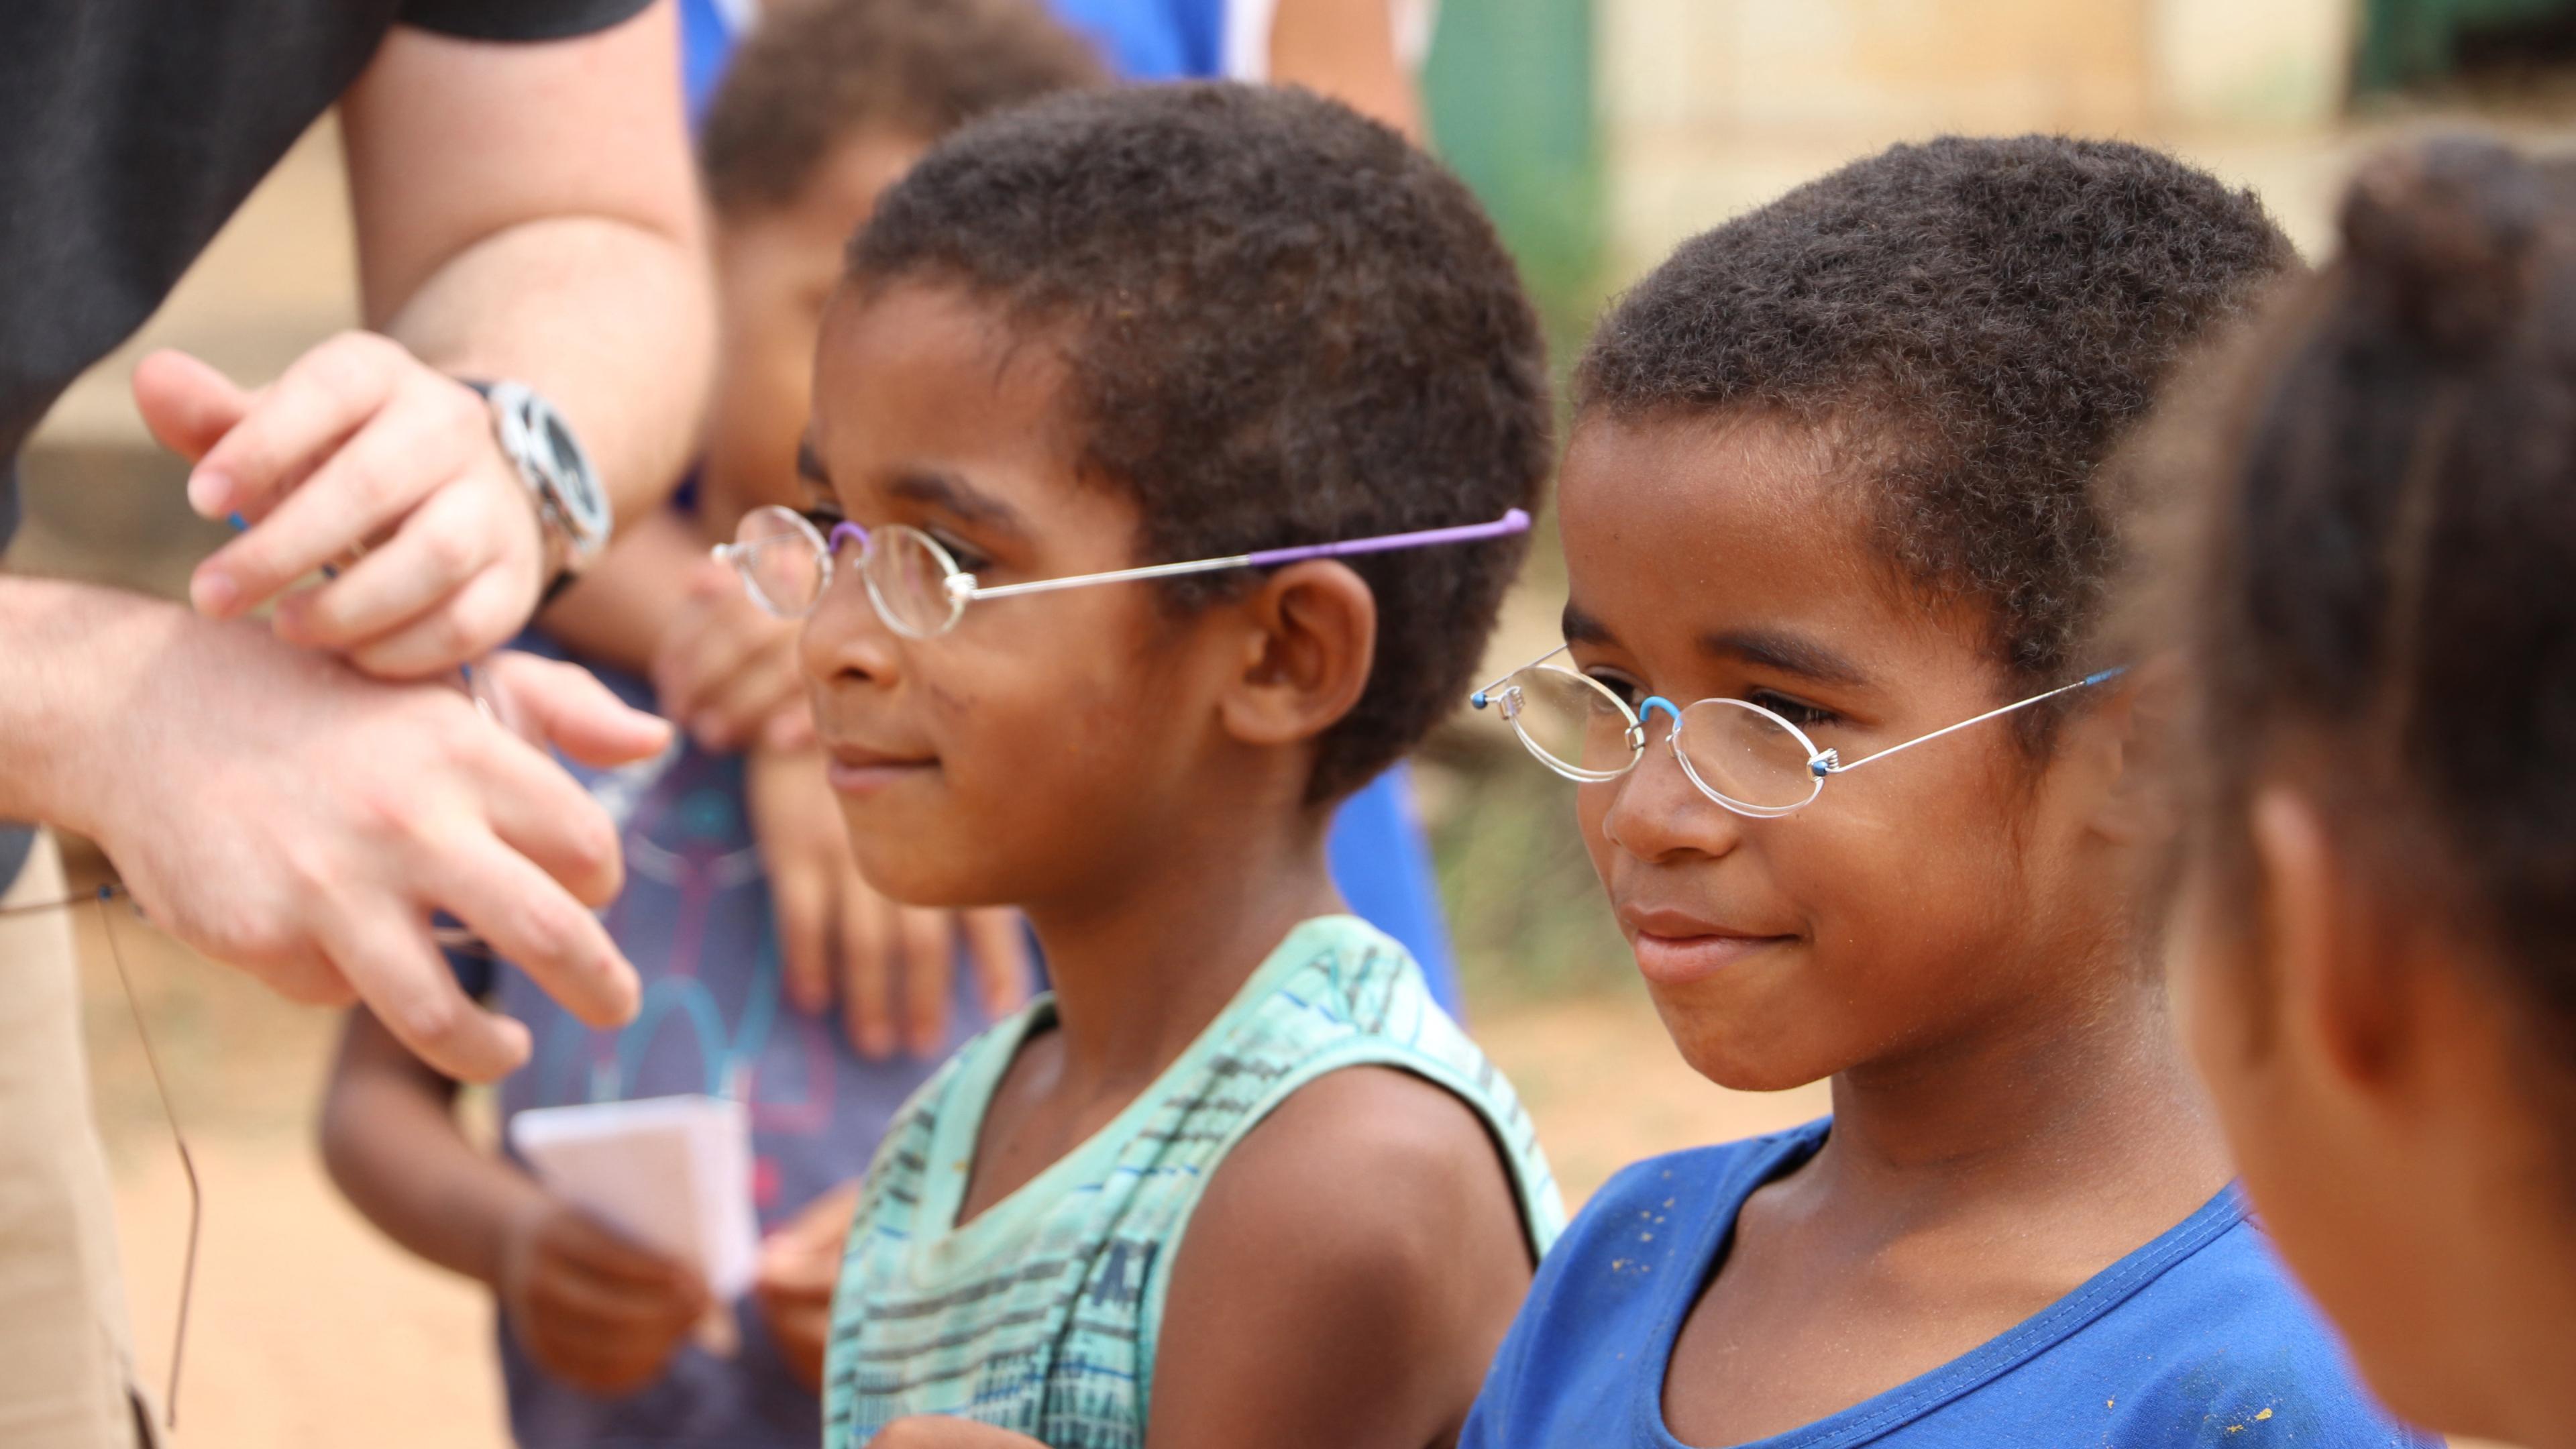 Two boys from Brazil with OneDollarGlasses 